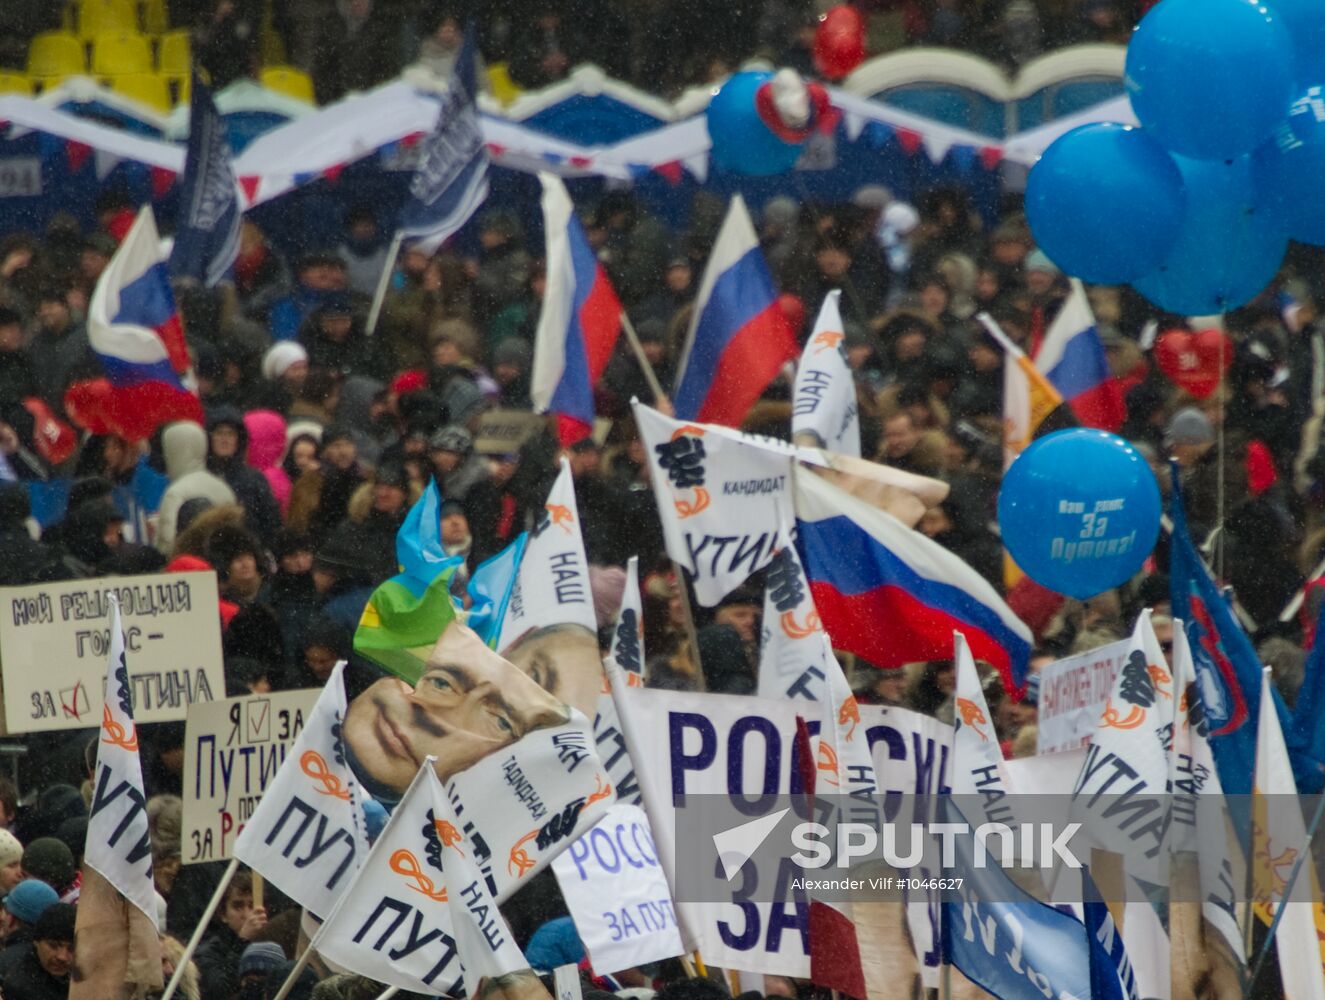 "Defend the Nation!" march and rally to support Putin